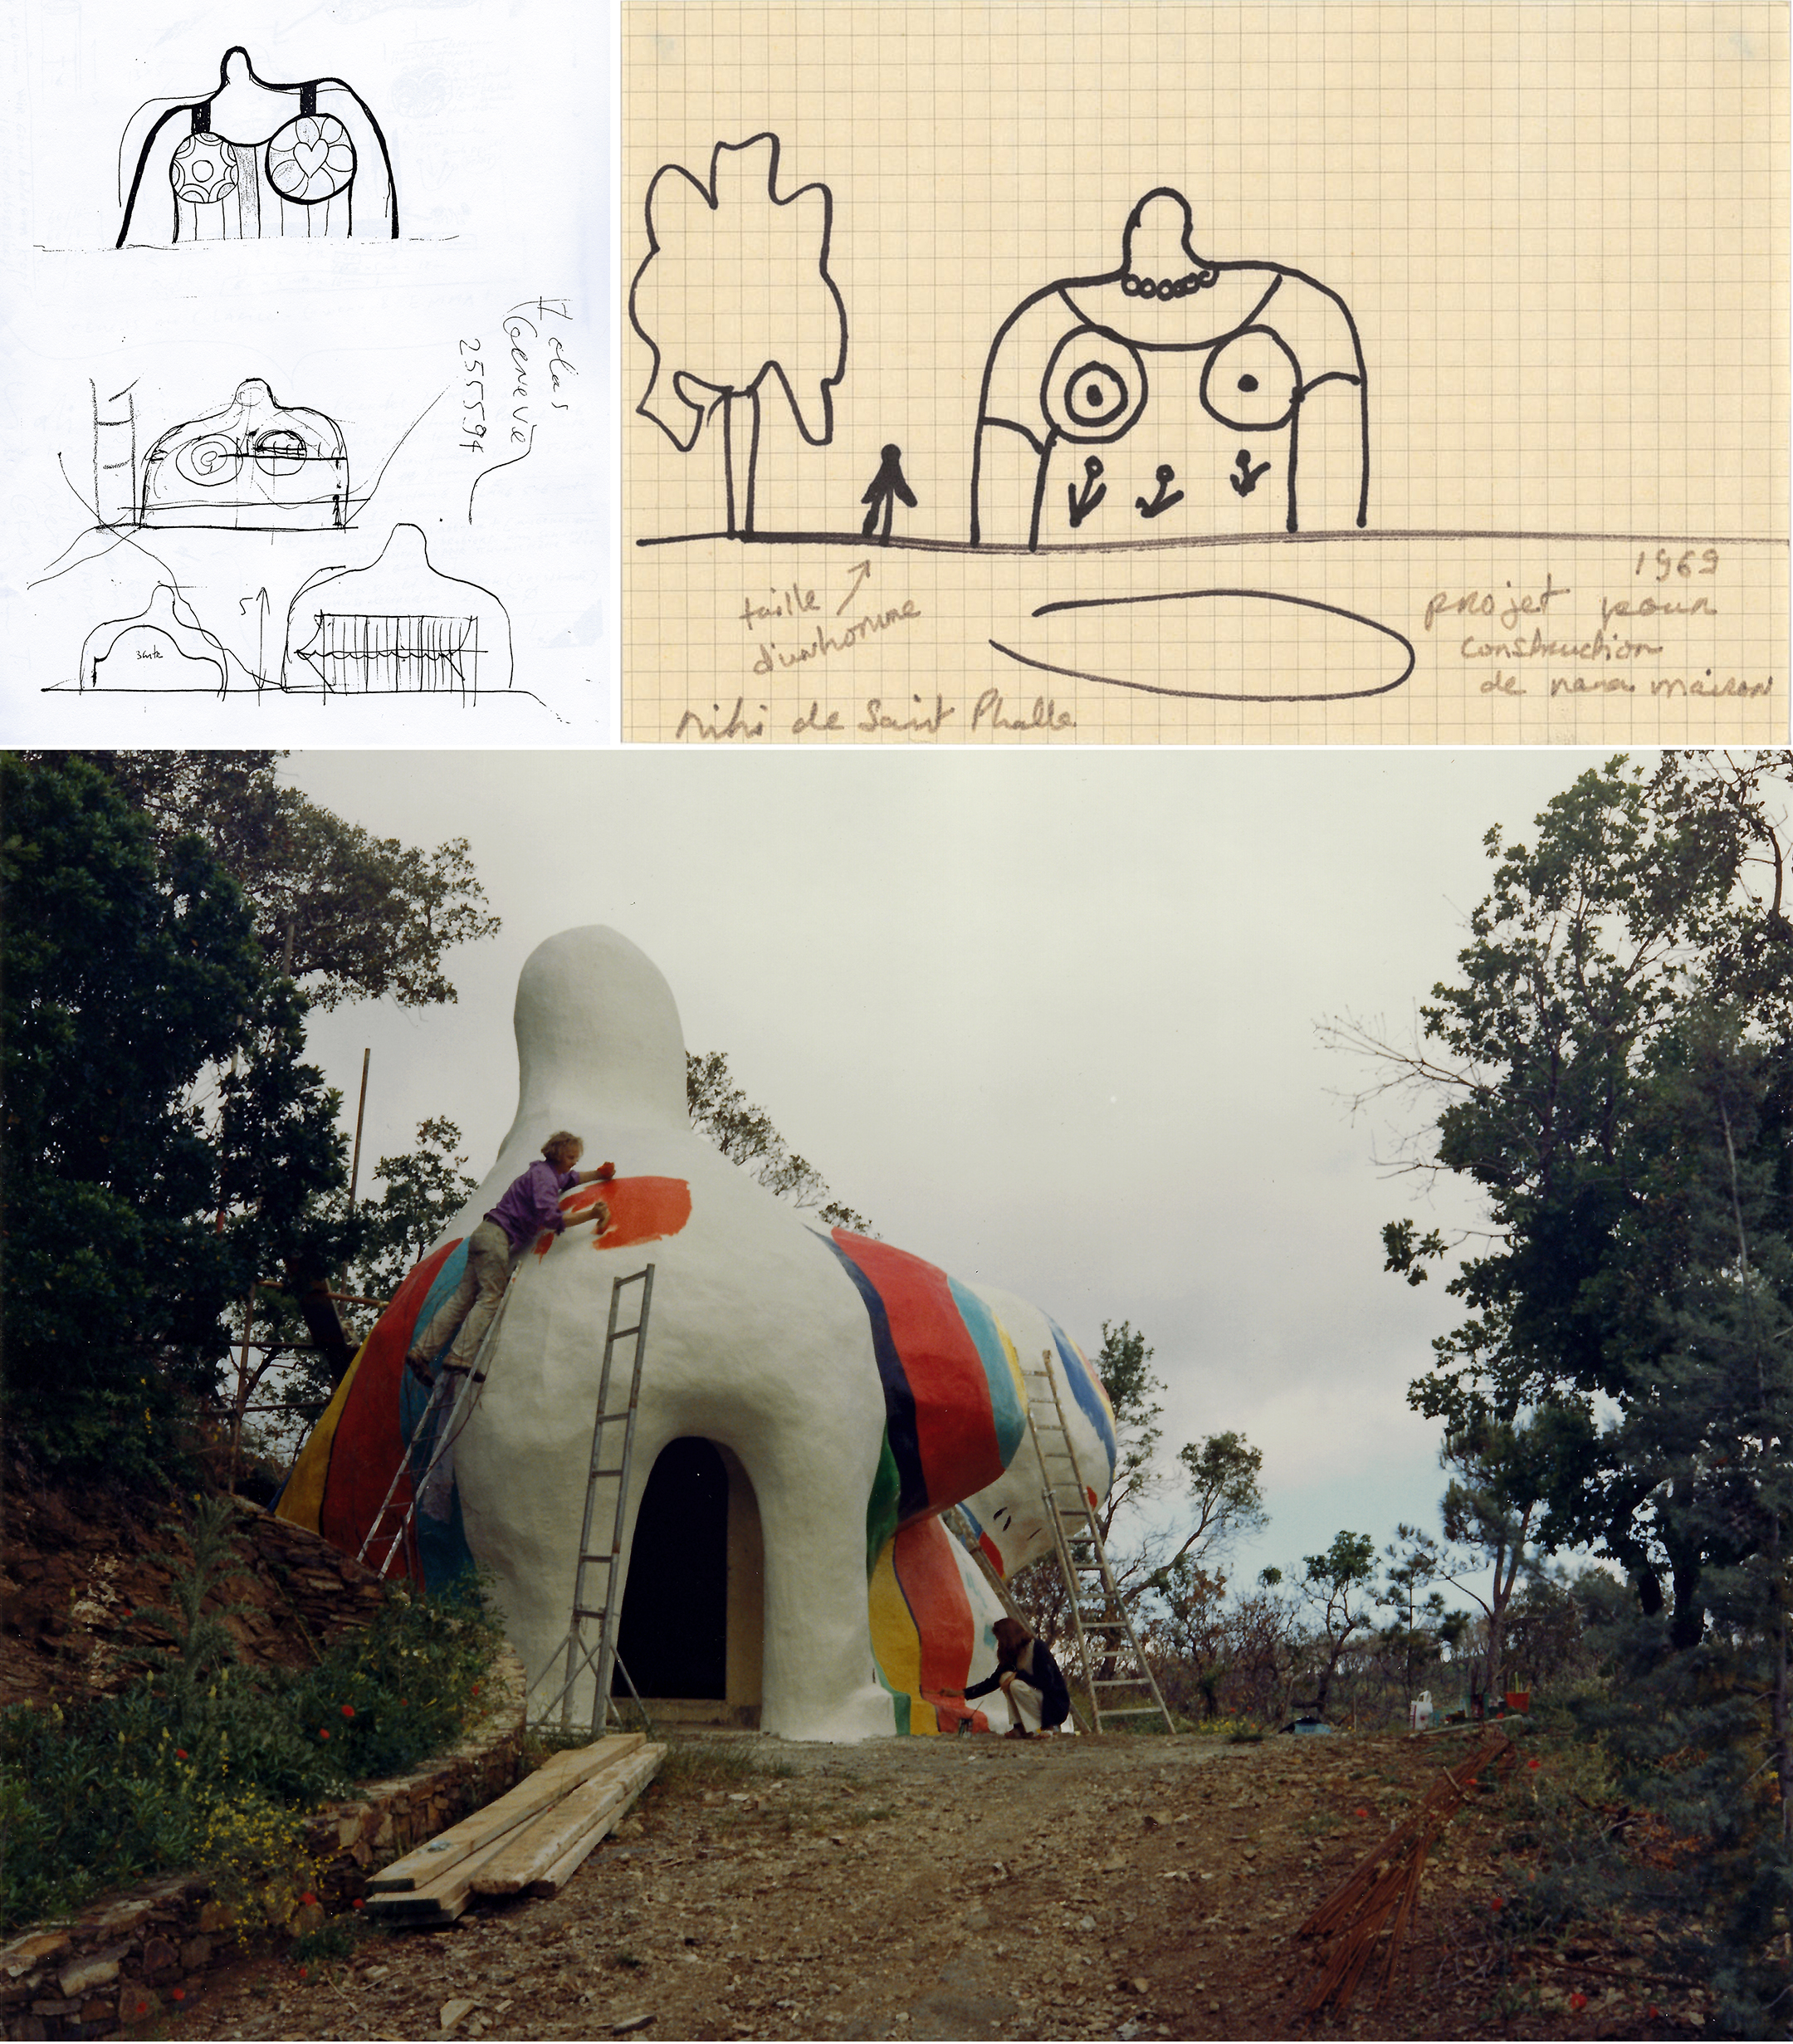 A pencil drawing by Niki de Saint Phalle and Jean Tinguely of the outside of Big Clarice in frontal view, as well as primitive structural lines inside and with a canopy. Next a black marker drawing on grid paper showing Big Clarice next to a figure and a tree. The notes in Niki de Saint Phalle's handwriting say: "taille d'un home" and "1969 project pour construction de nano maison"
Bottom pictures shows Rainer von Hessen on a ladder painting orange patches on Big Clarice. Niki de Saint Phalle paints the front kneeling down.